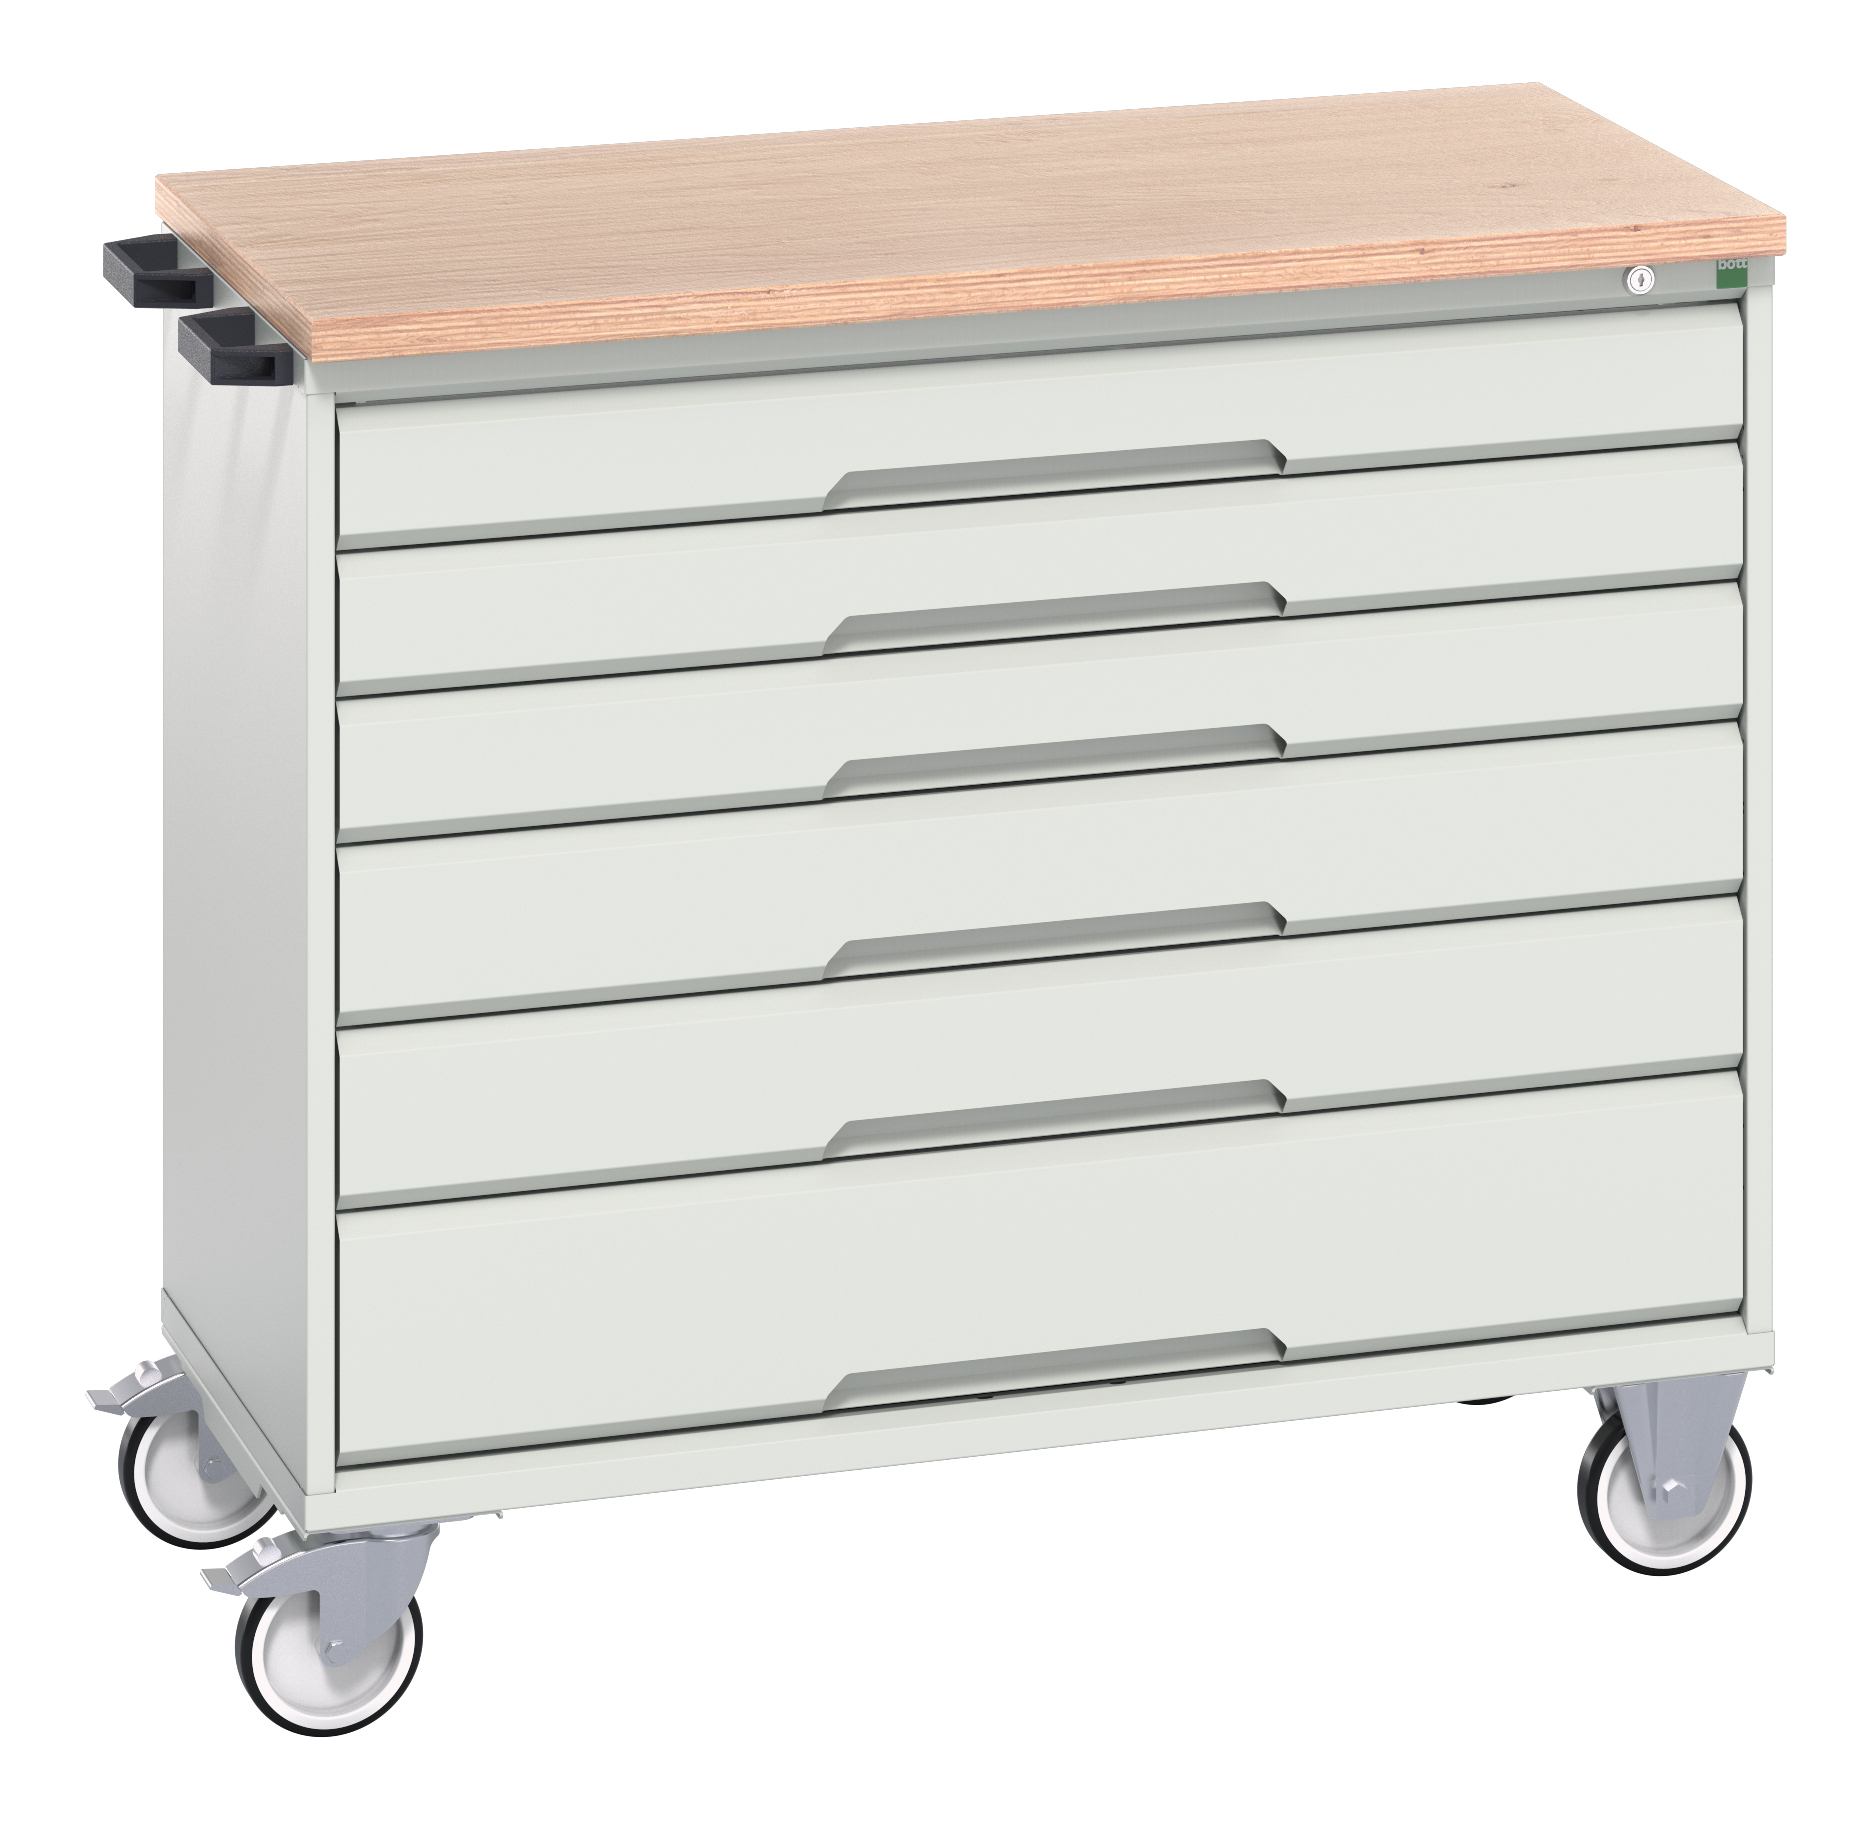 Bott Verso Mobile Drawer Cabinet With 6 Drawers & Multiplex Top - 16927054.16